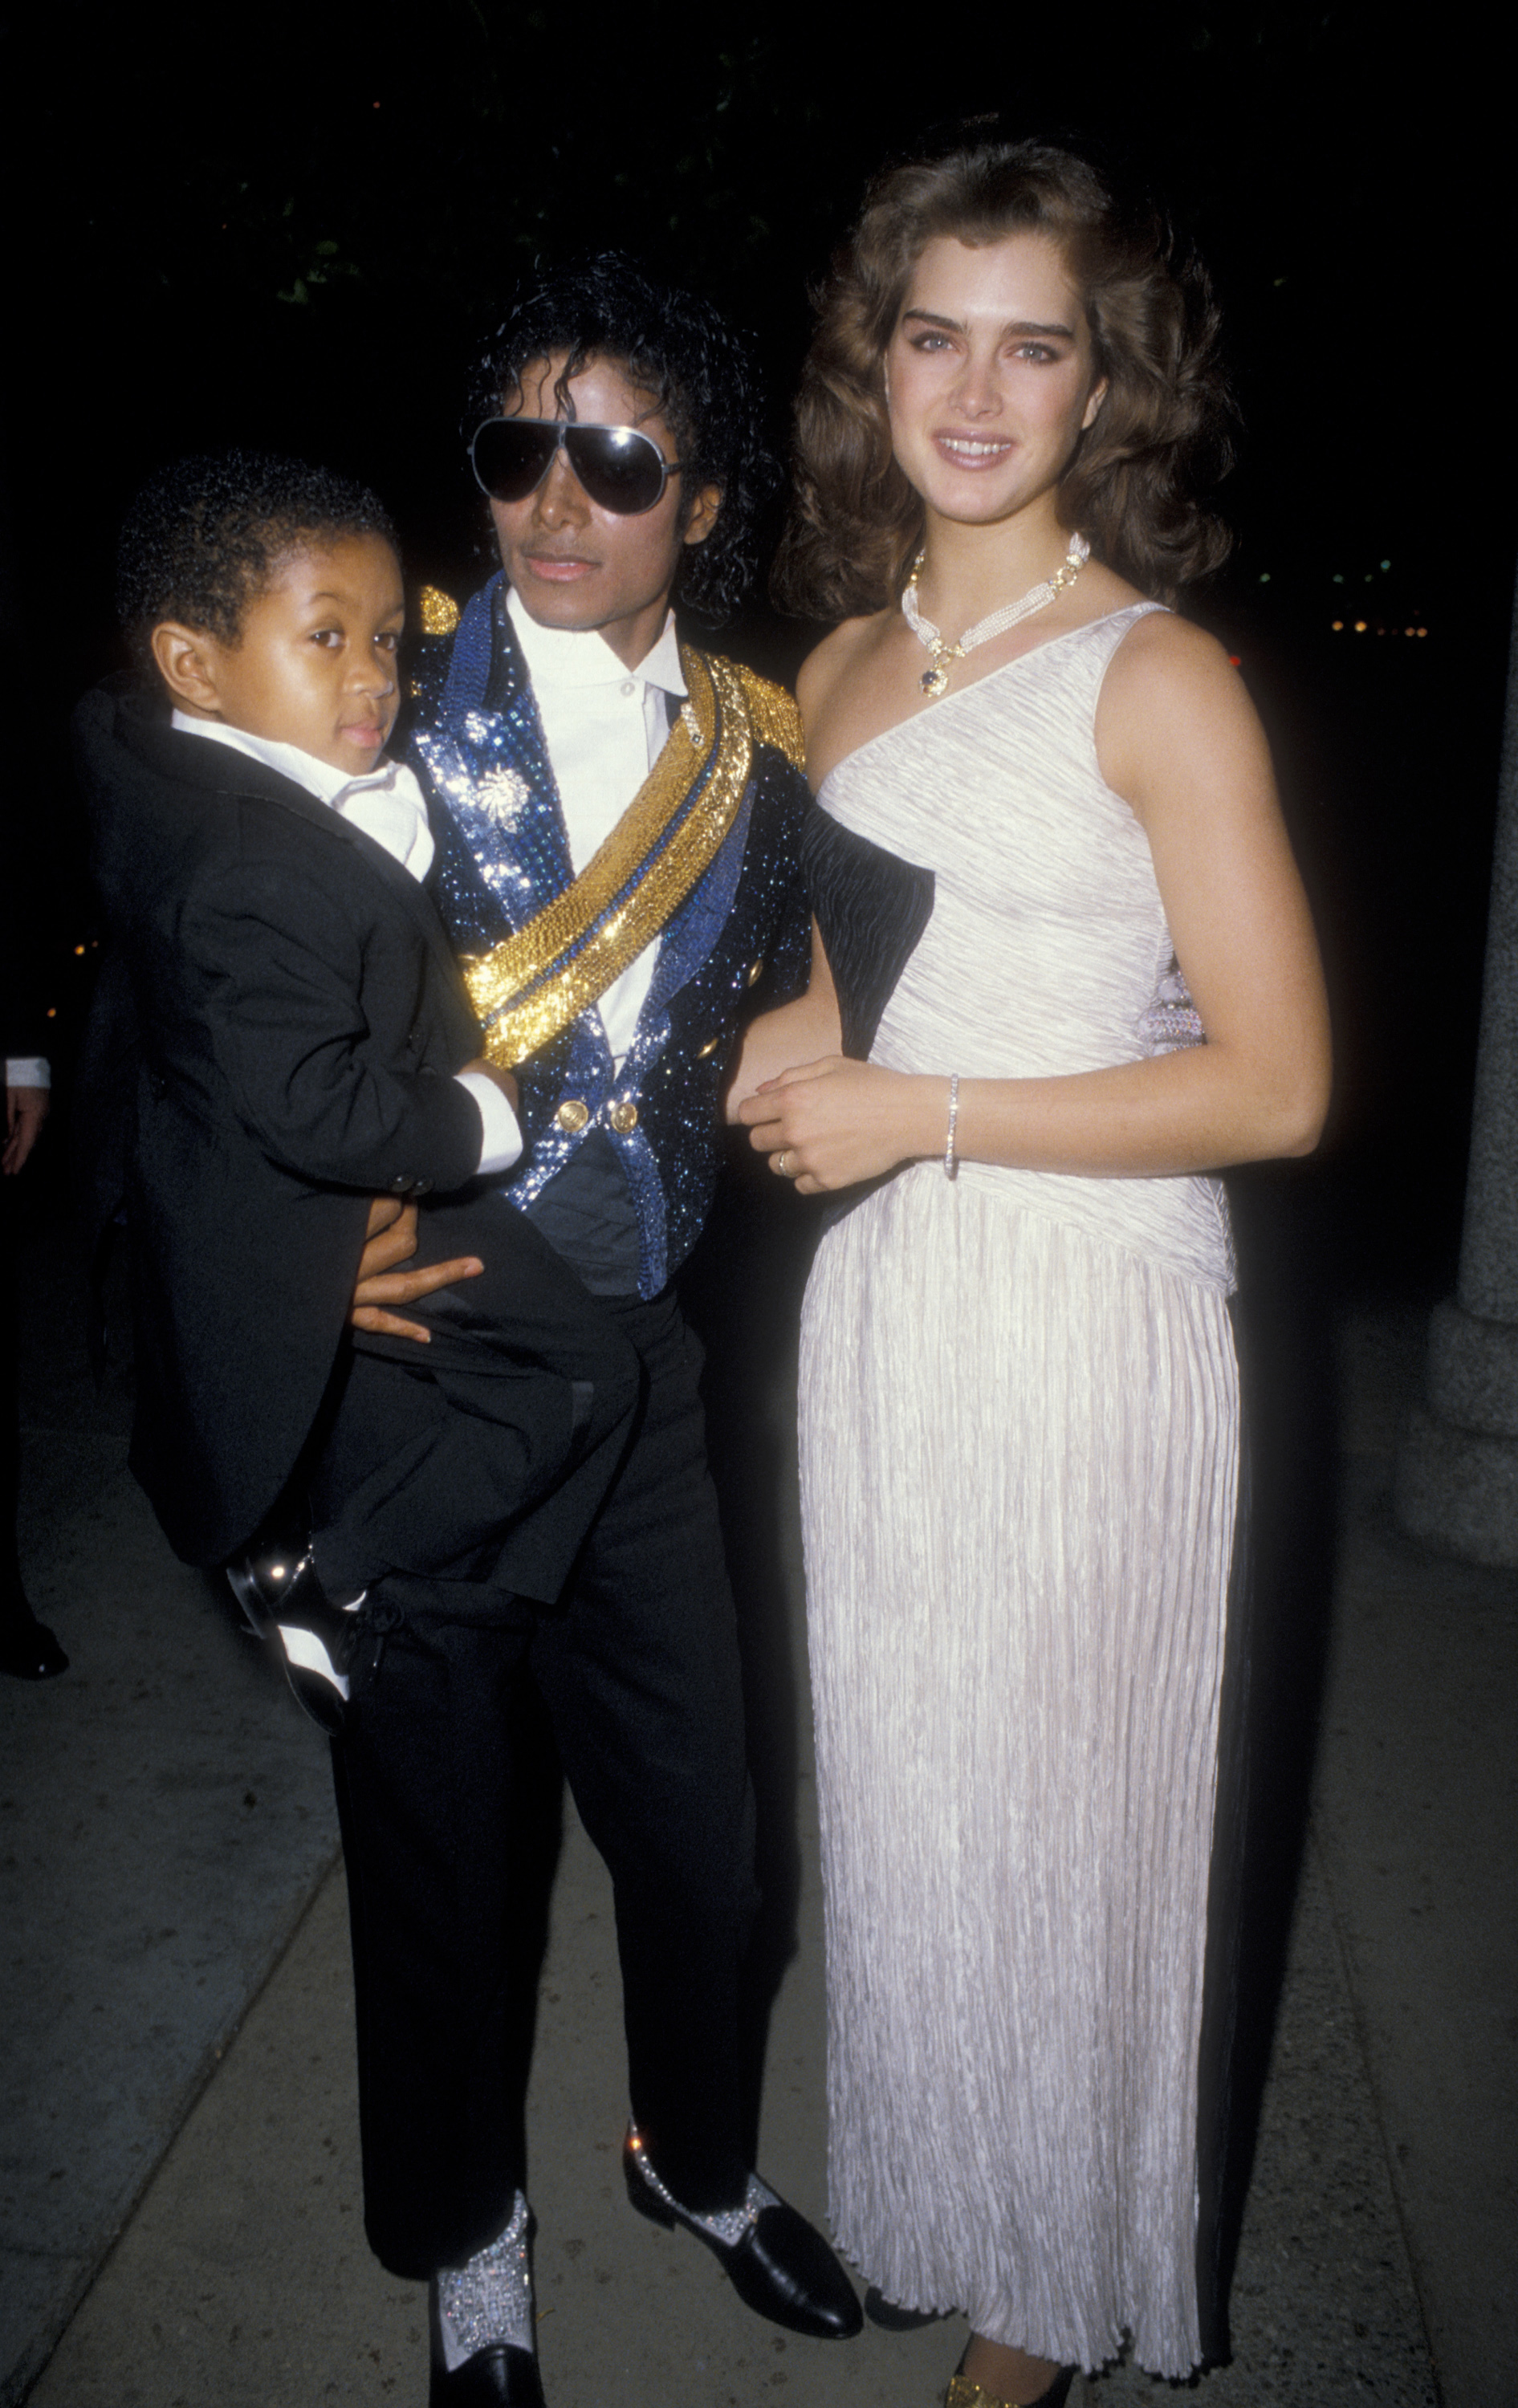 Emmanuel Lewis, Michael Jackson, and Brooke Shields at the 26th Annual Grammy Awards in 1984. | Source: Getty Images